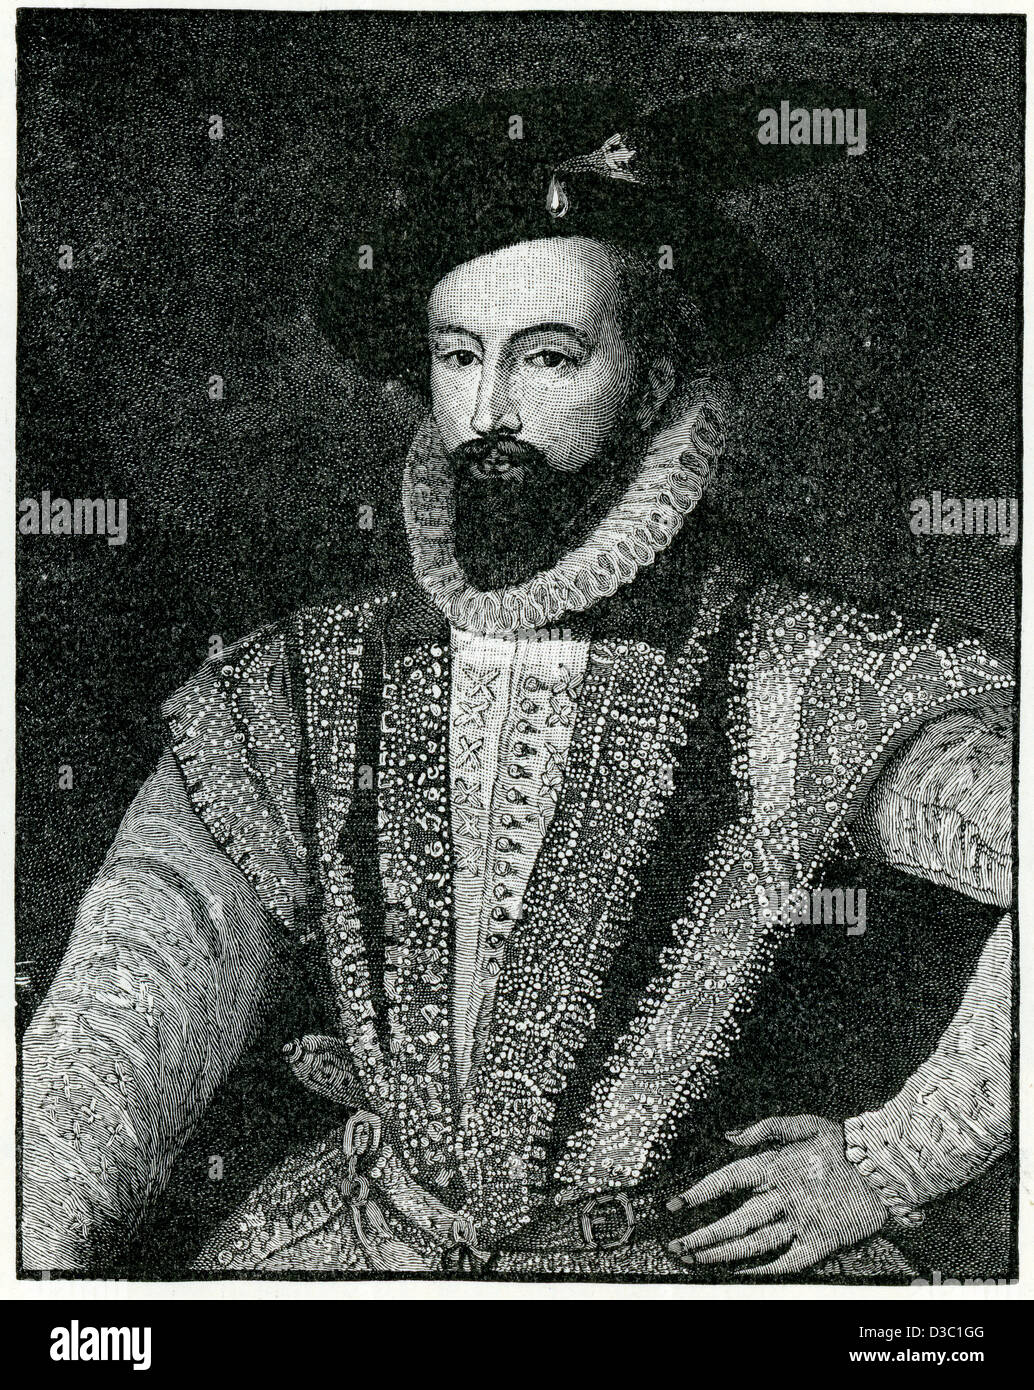 Vintage engraving of Sir Walter Raleigh an English aristocrat, writer, poet, soldier, courtier, spy, and explorer. Stock Photo